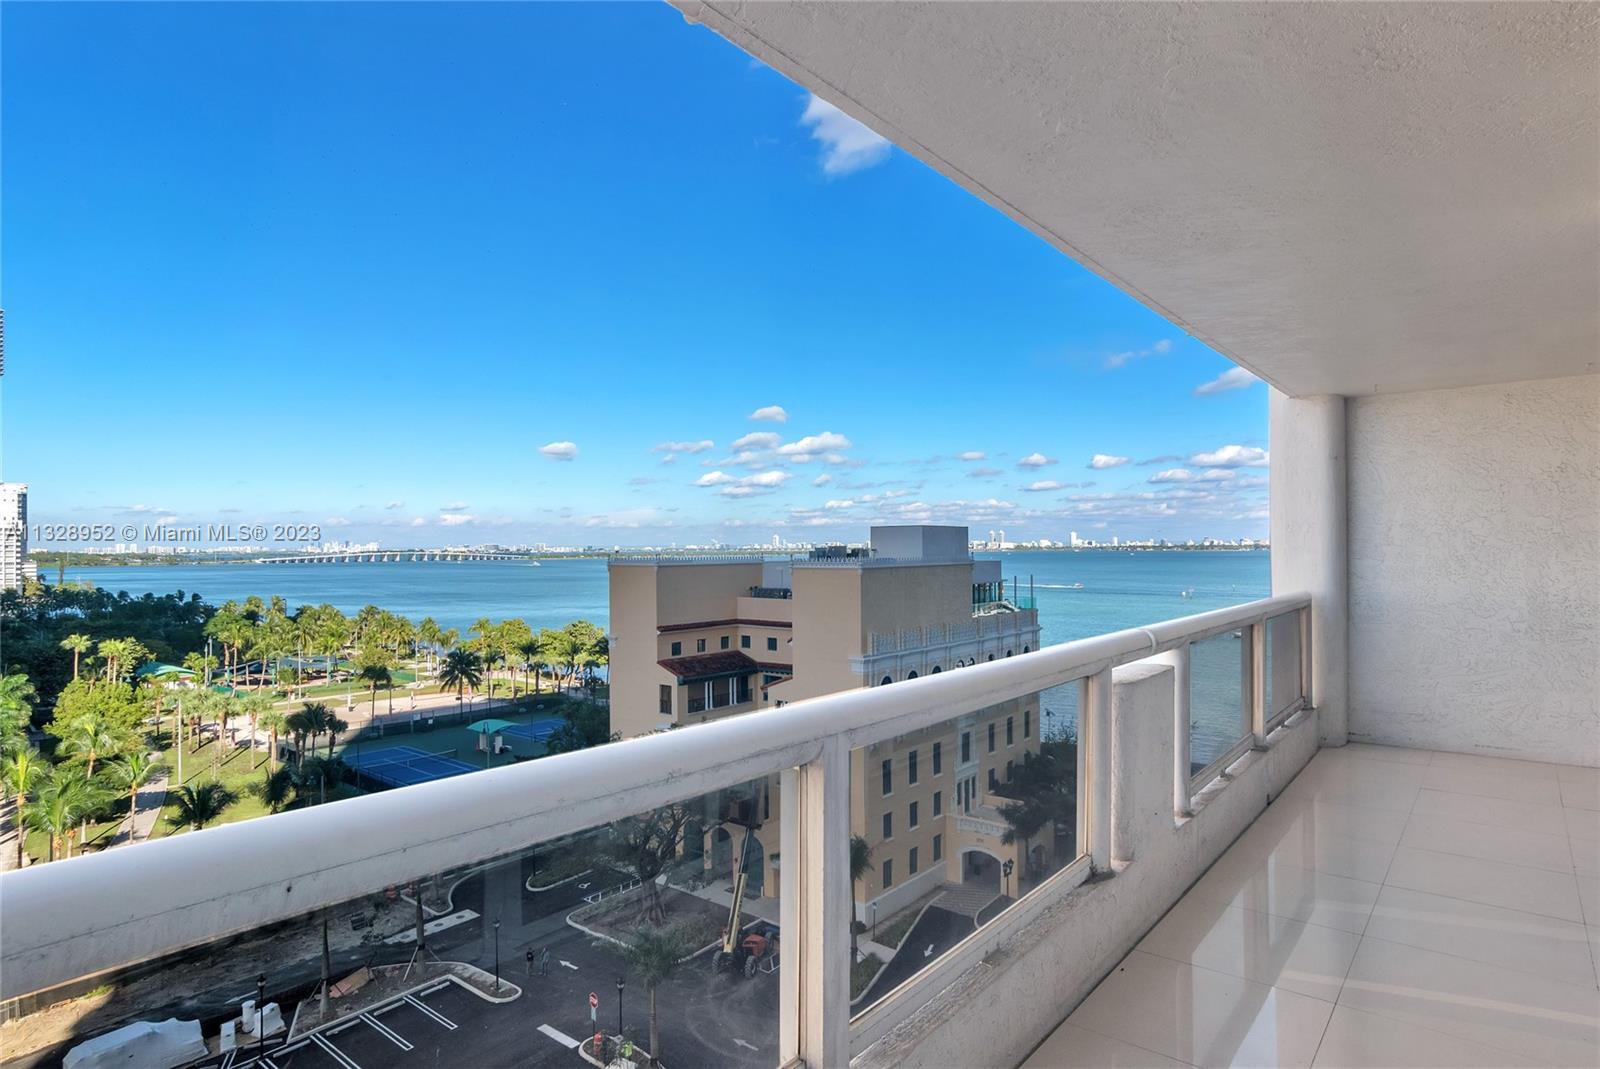 Stunning bay views with prime central location make this beautiful spacious one bedroom 1.5 bath a m